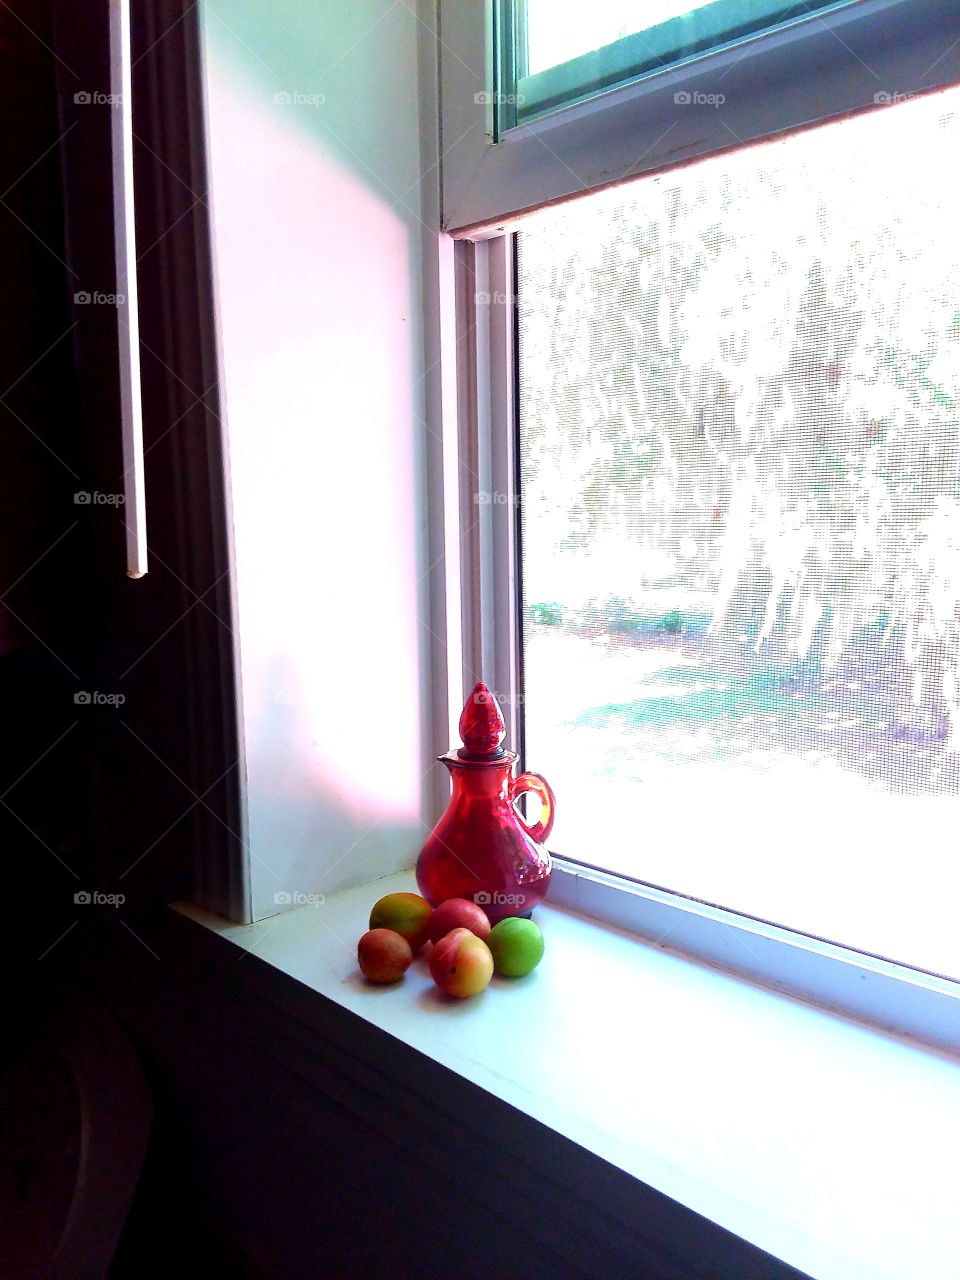 Dwarf Plums ripening in the kitchen window with red glass pitcher